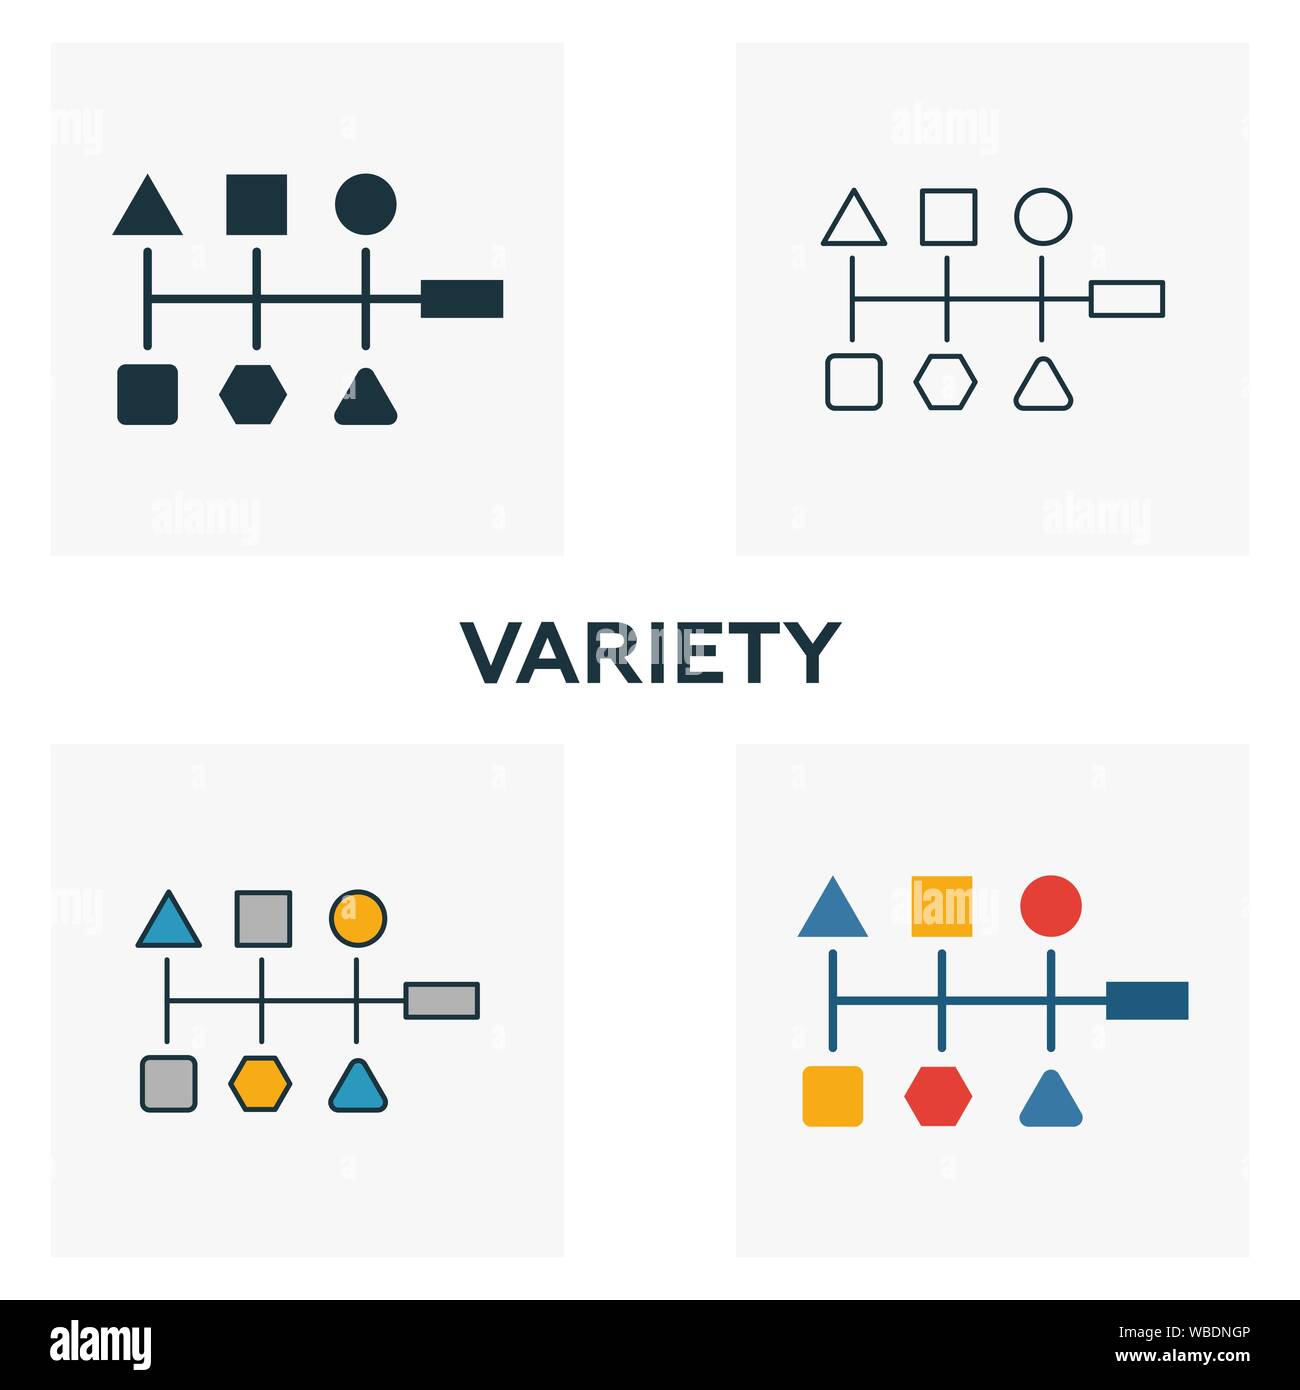 Variety icon set. Four elements in diferent styles from big data icons collection. Creative variety icons filled, outline, colored and flat symbols Stock Vector